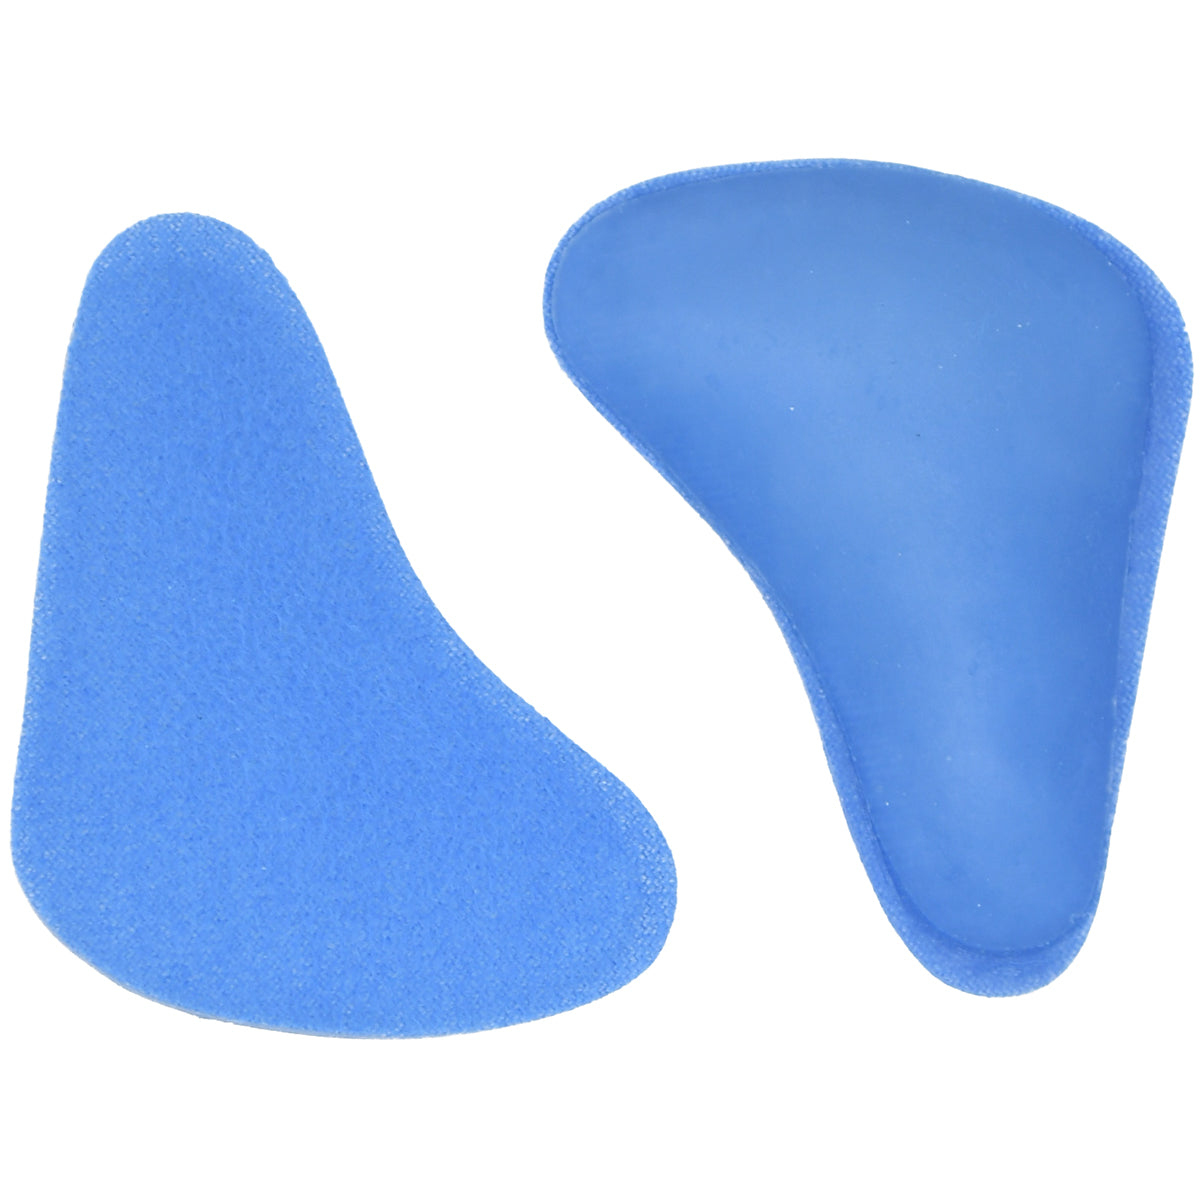 Soft Stride Pain Relief Metatarsal Pads Soft Stride